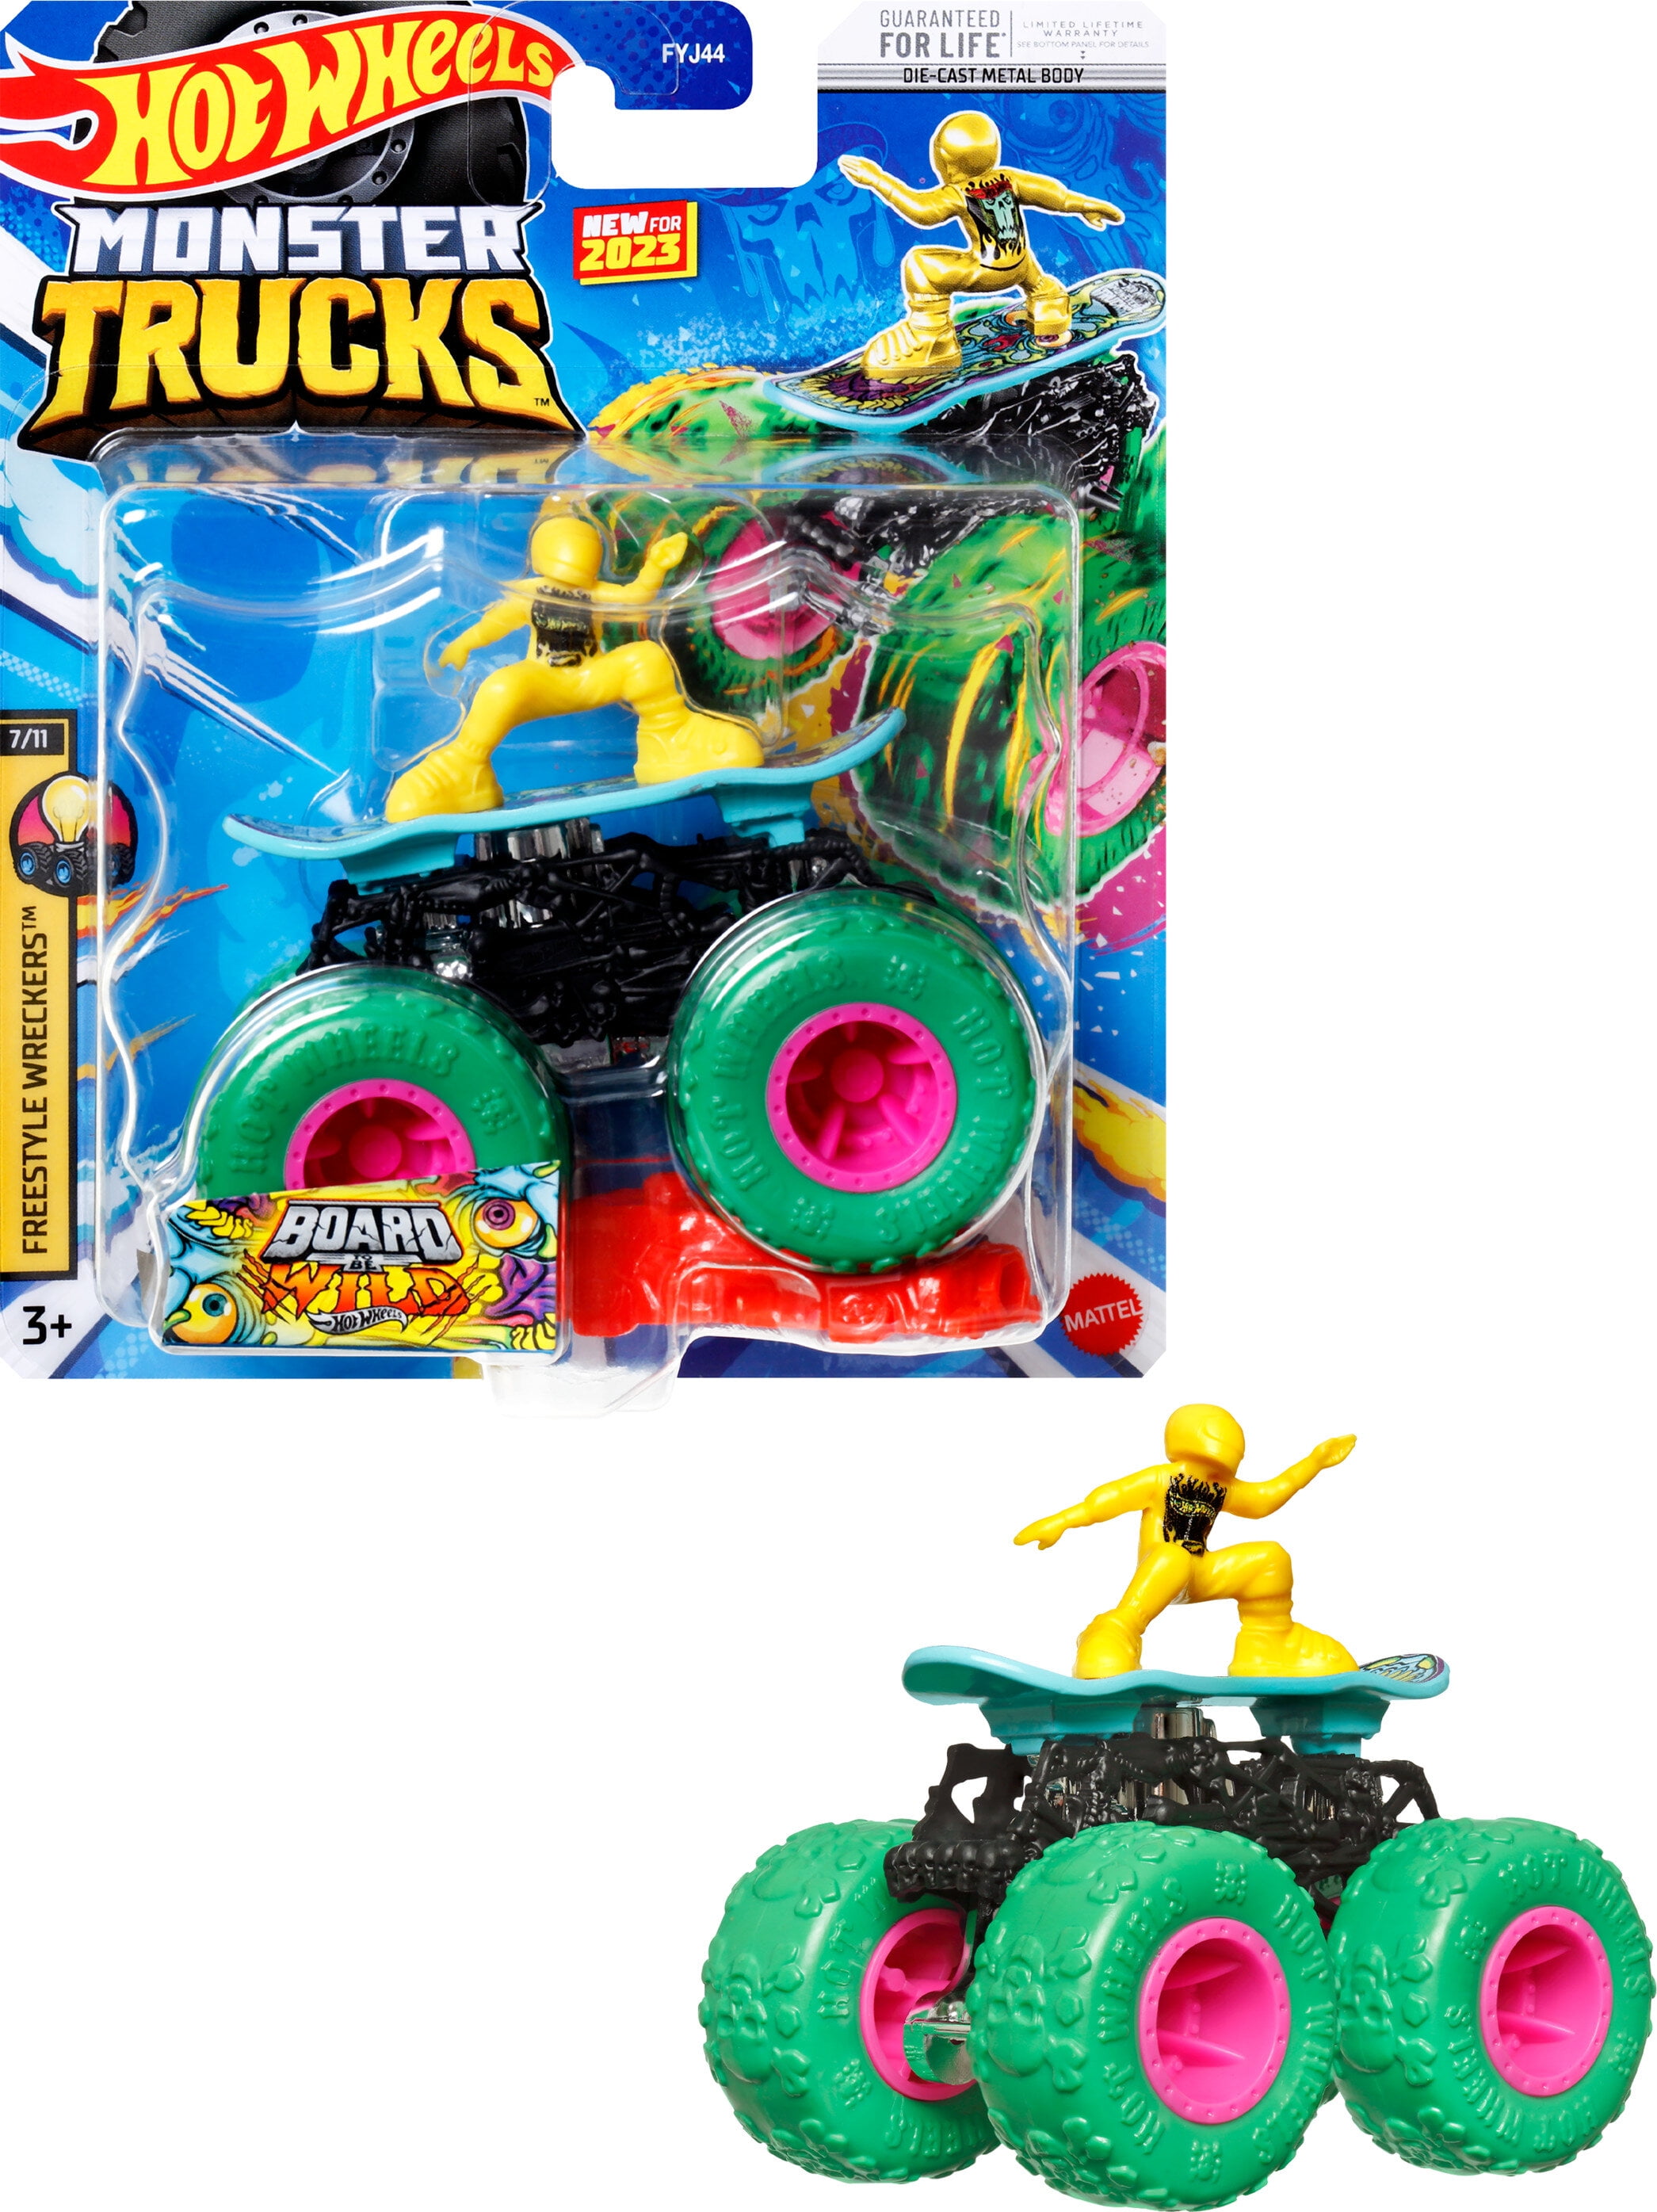 Hot Wheels 1:64 Collection Monster Truck With Extra Car (Styles May Vary) -  MTTGRH81